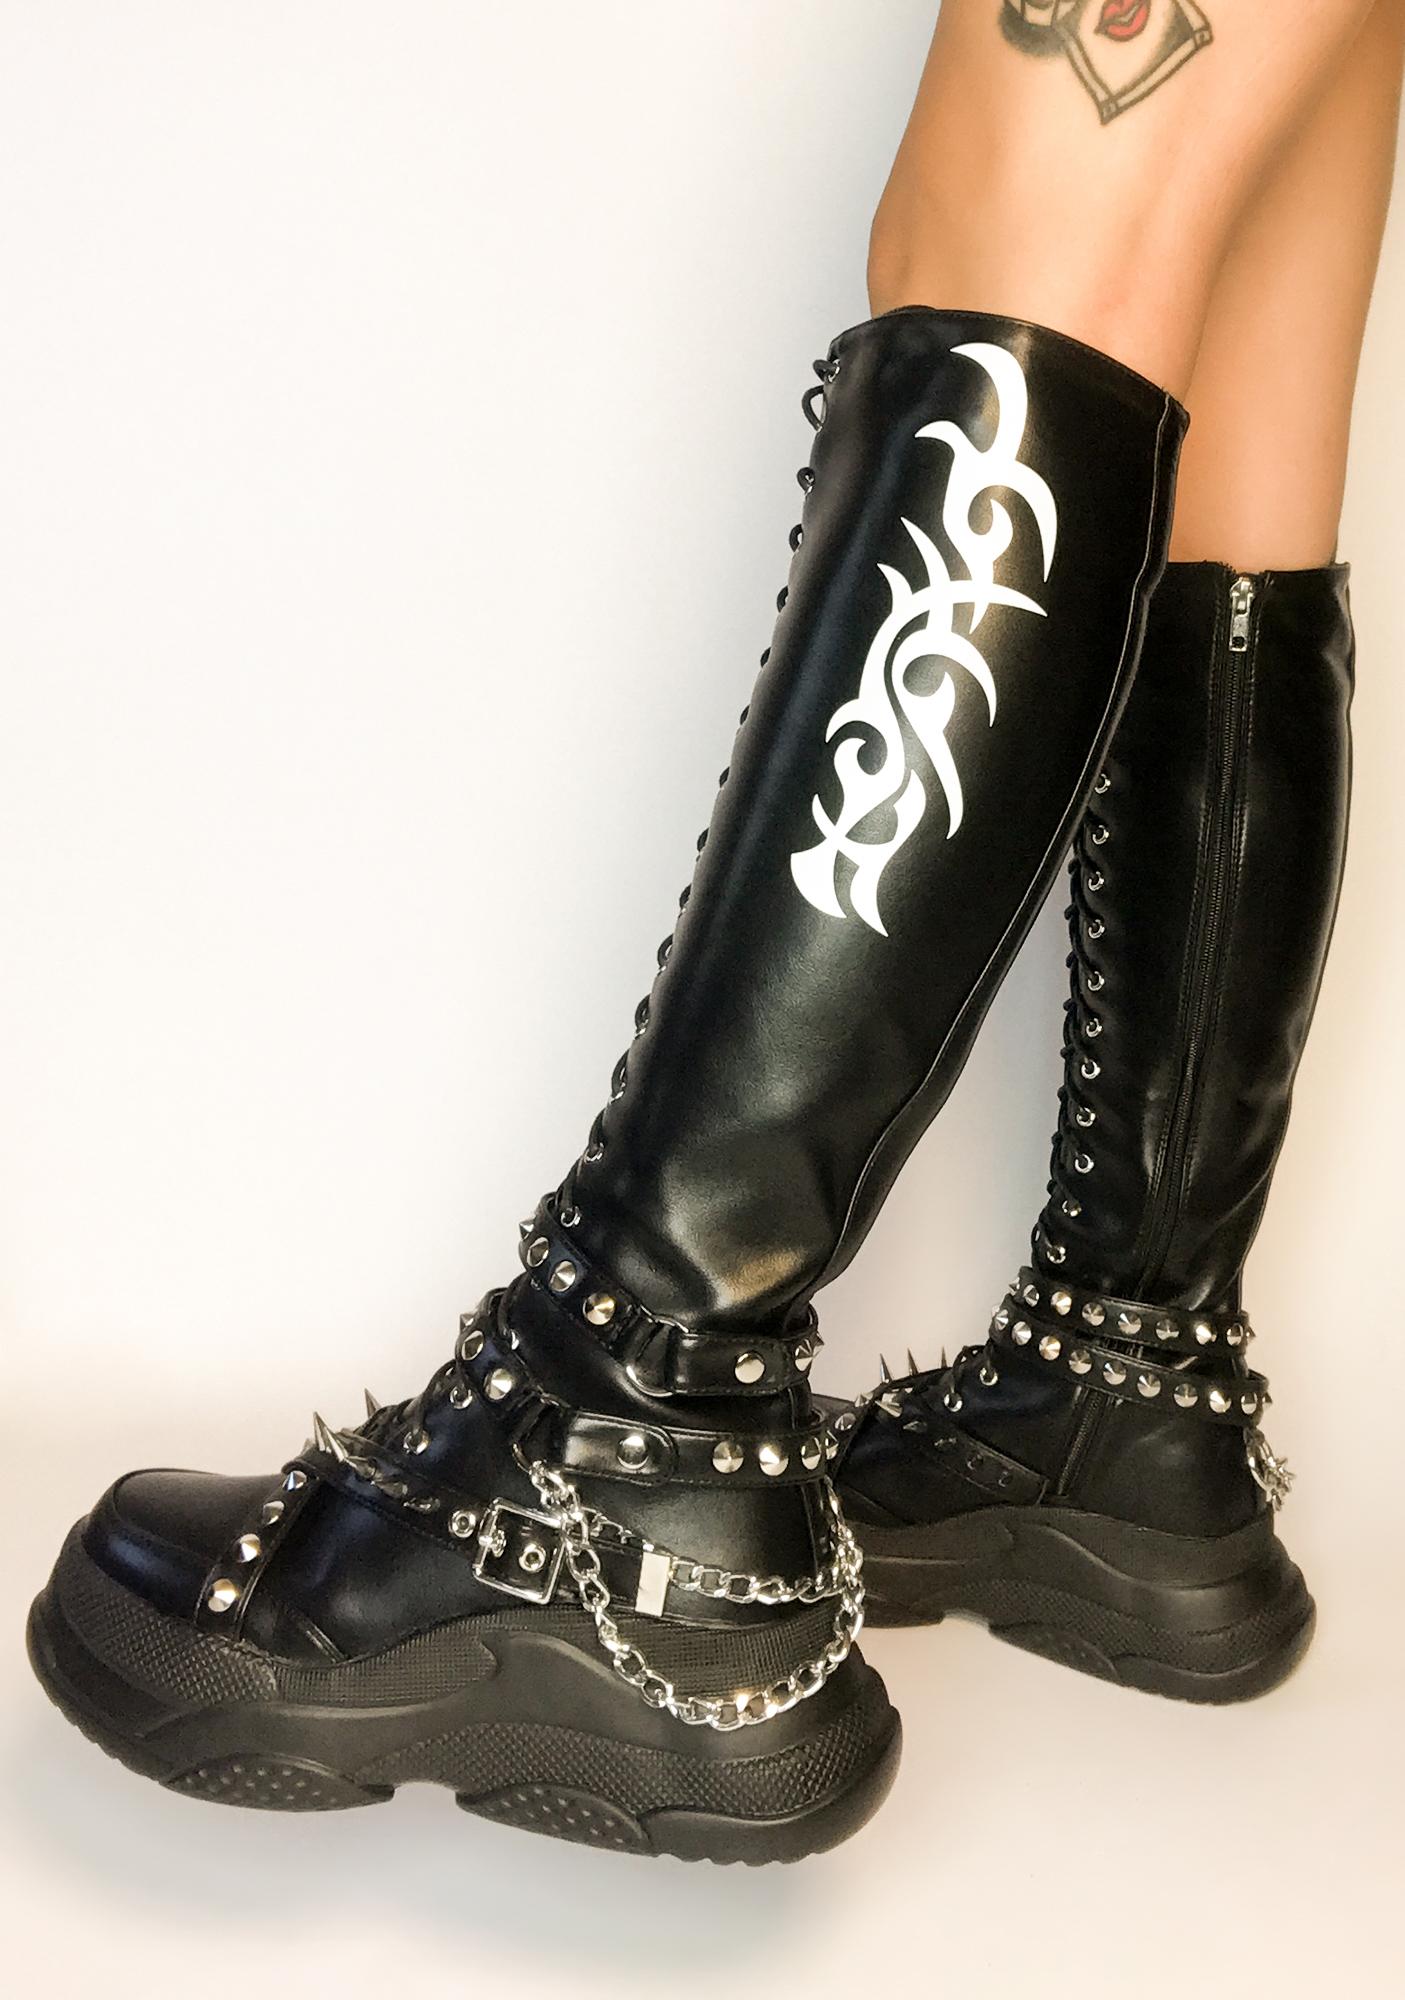 Spiked Knee High Combat Boots 